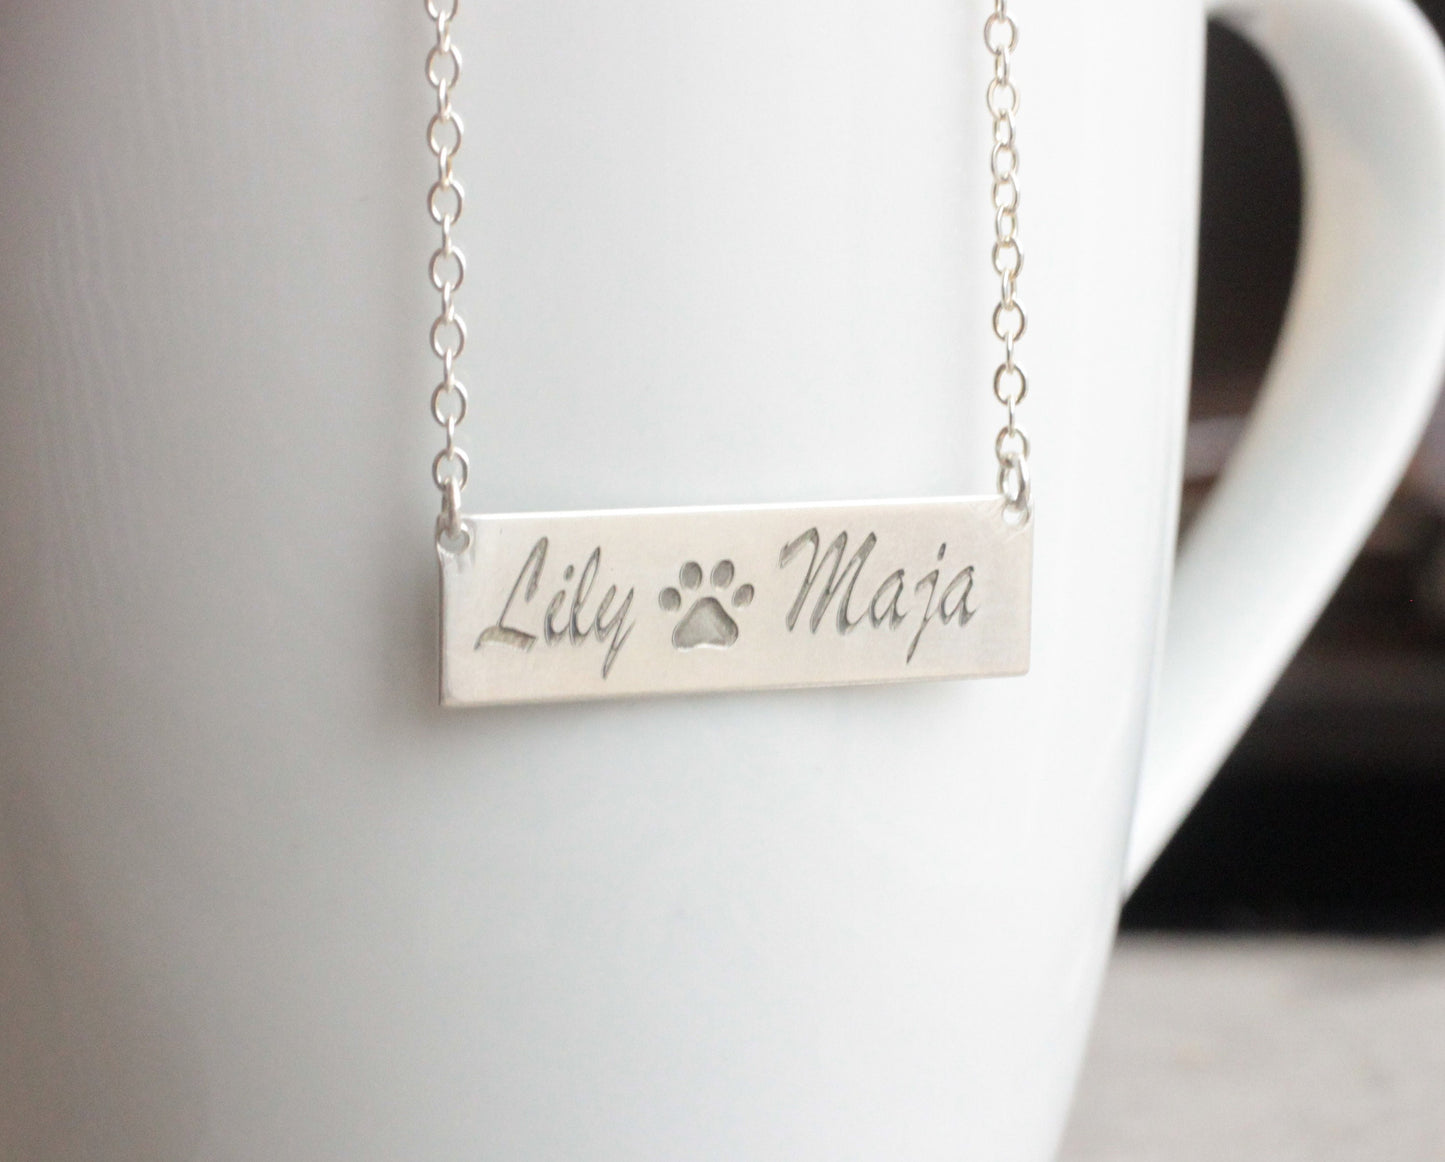 Pawprint Necklace // Sterling Silver Name Necklace // Custom Engraved Bar Jewelry // Pet Memorial Necklace // Gift for Her